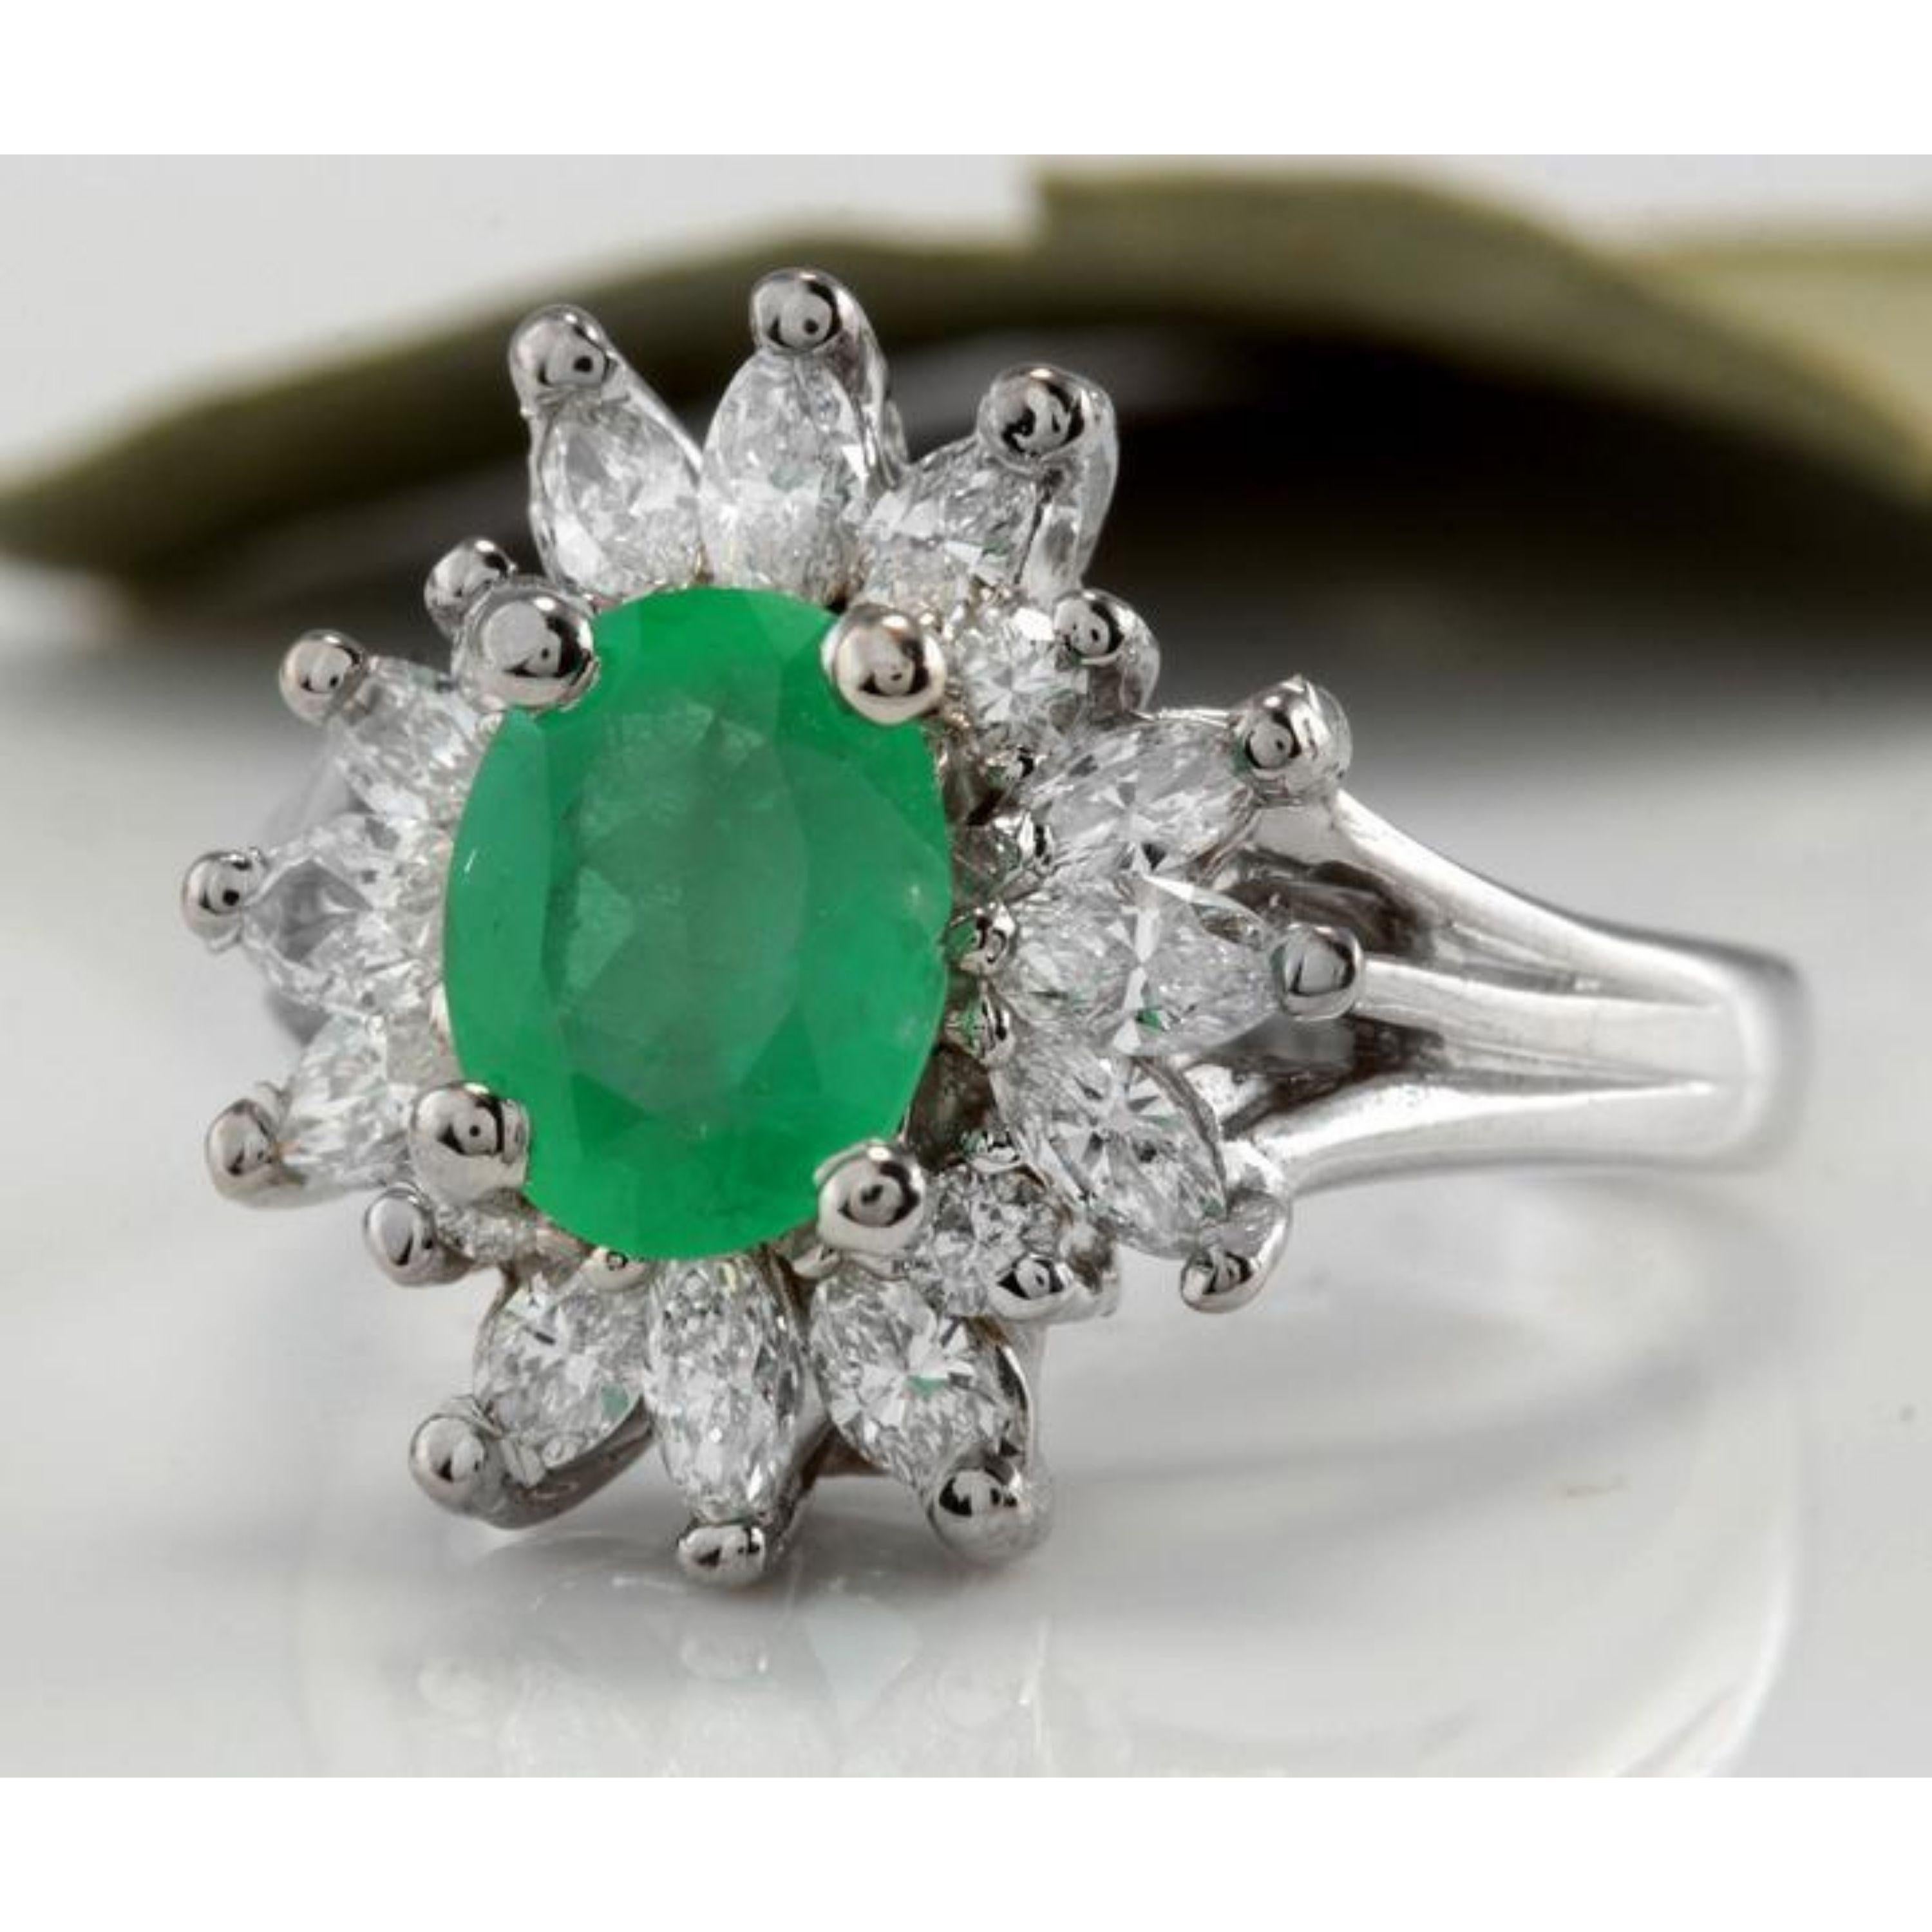 2.65 Carats Natural Colombian Emerald and Diamond 14K Solid White Gold Ring

Total Natural Green Emerald Weight is: 1.40 Carats (transparent)

Emerald Measures: 8.44 x 6.62mm

Natural Round & Marquise Diamonds Weight: 1.25 Carats (color G-H /